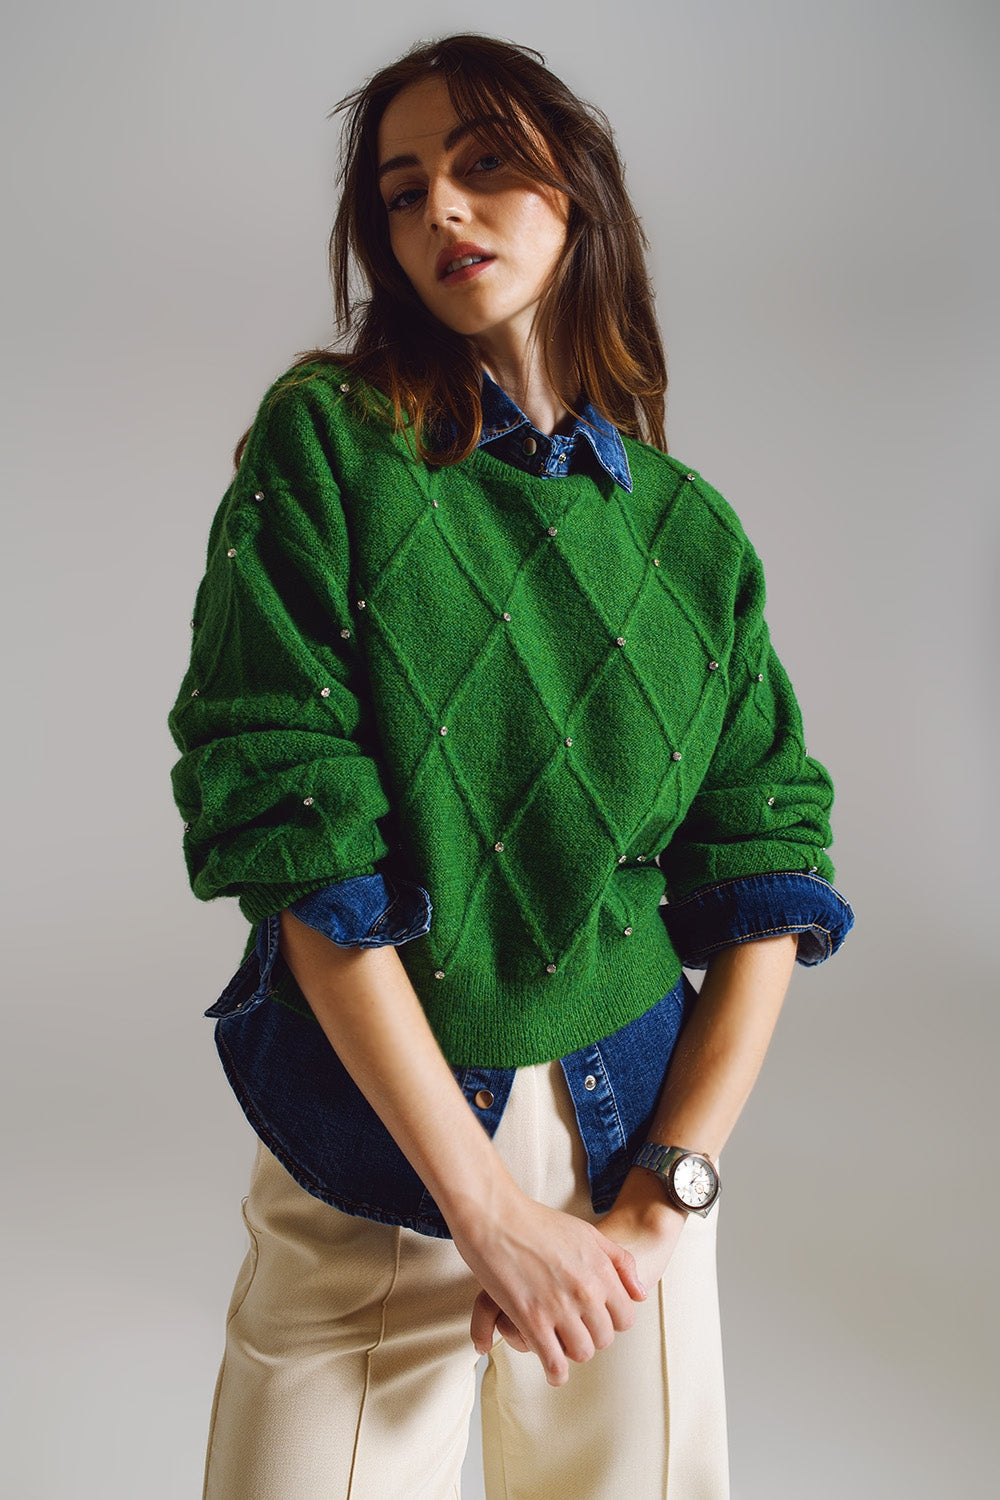 Sweater With Argyle Knit With Embellished Details in Green - Szua Store